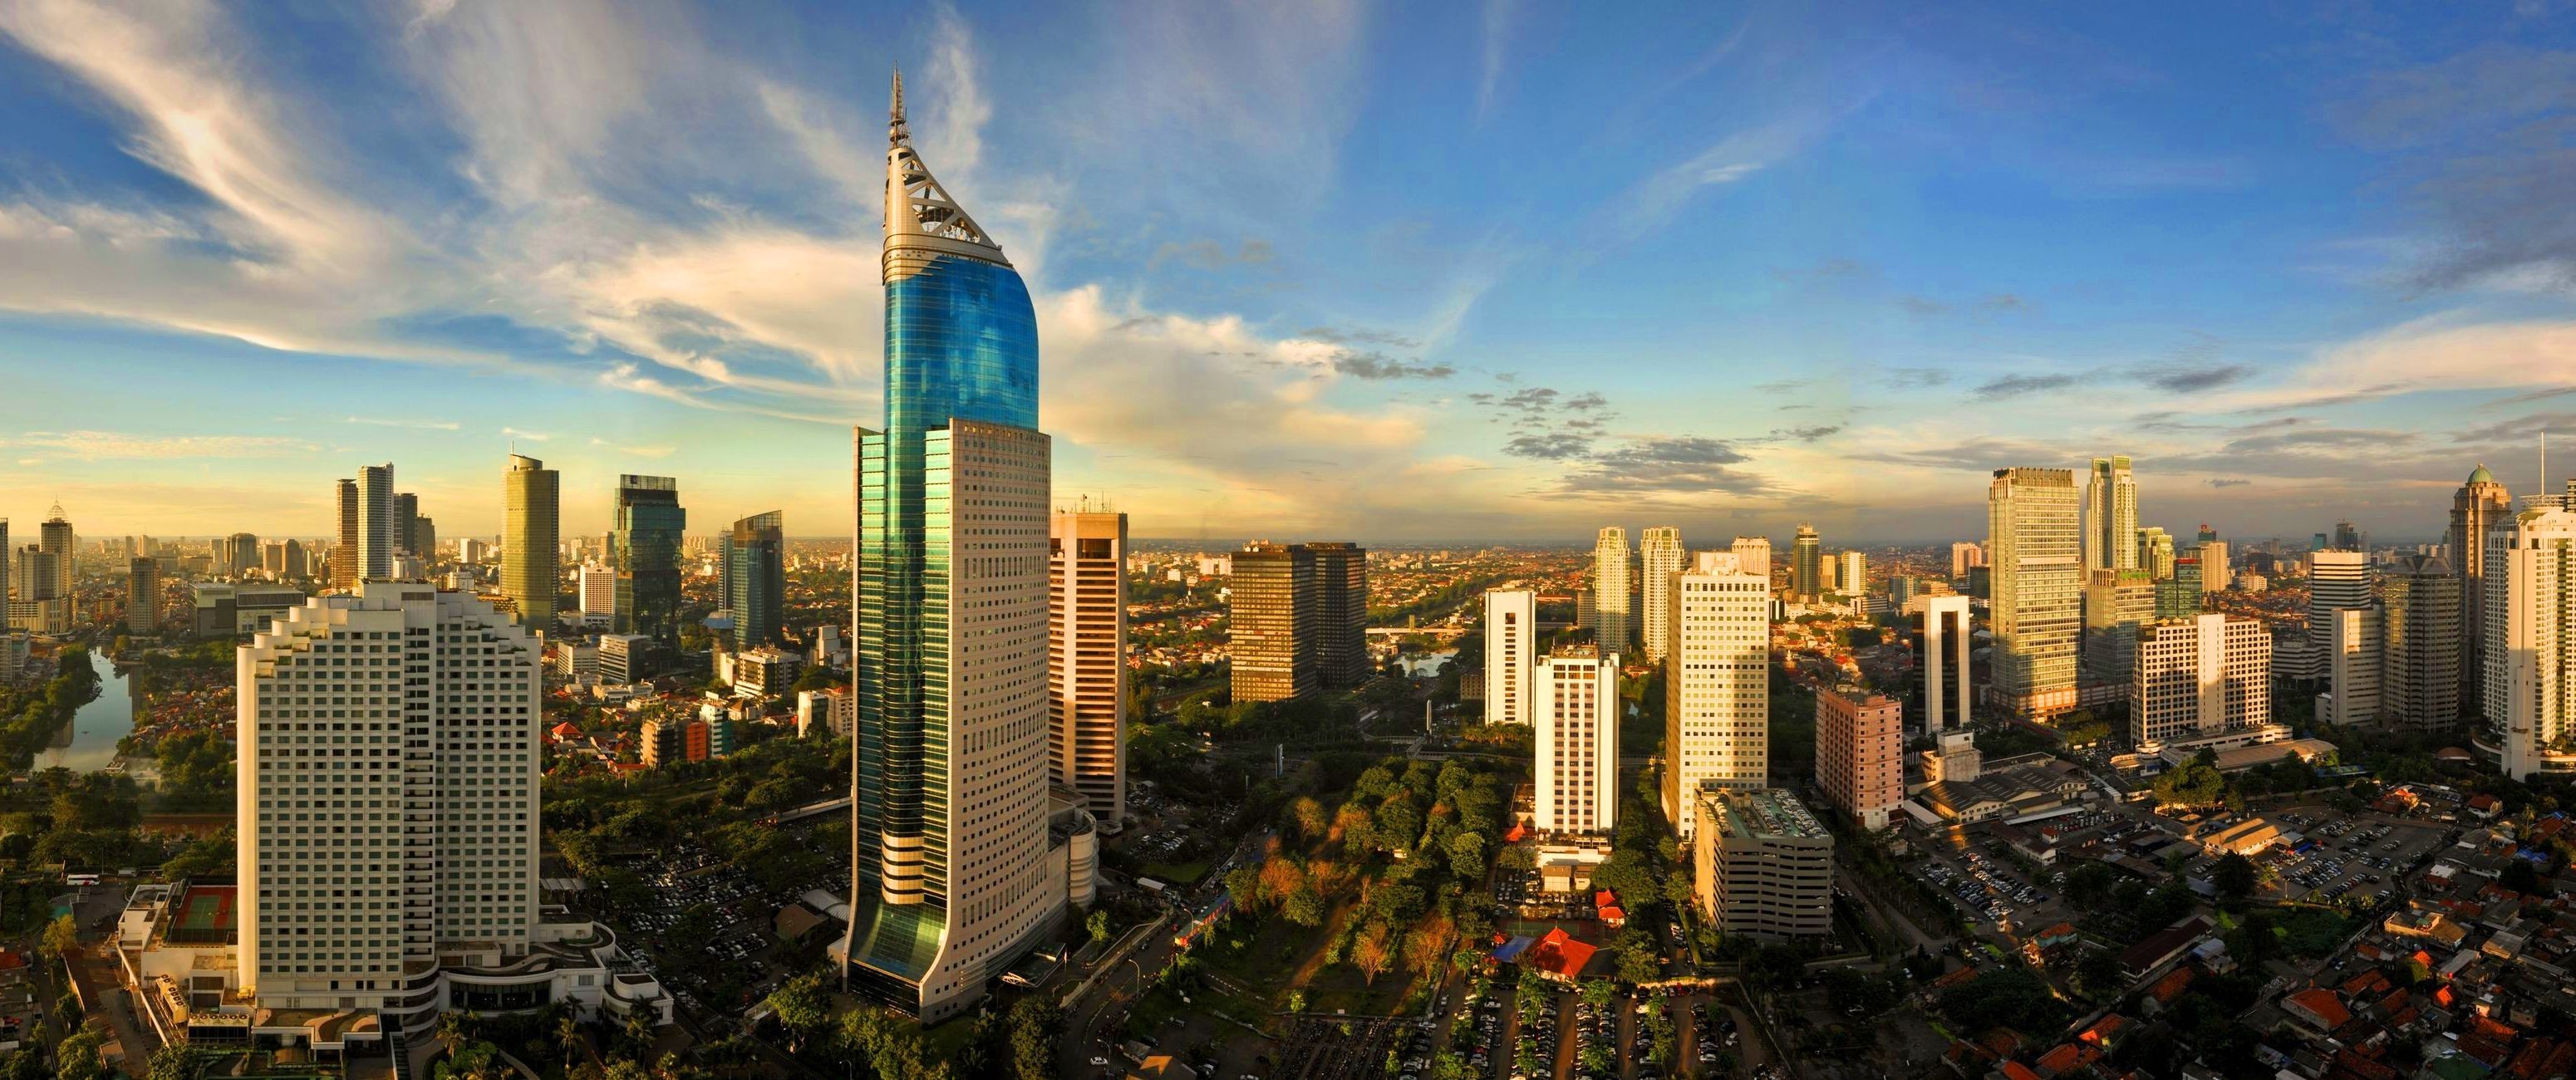 3100x1300 Cityscapes indonesia cities skyline jakarta wallpaper